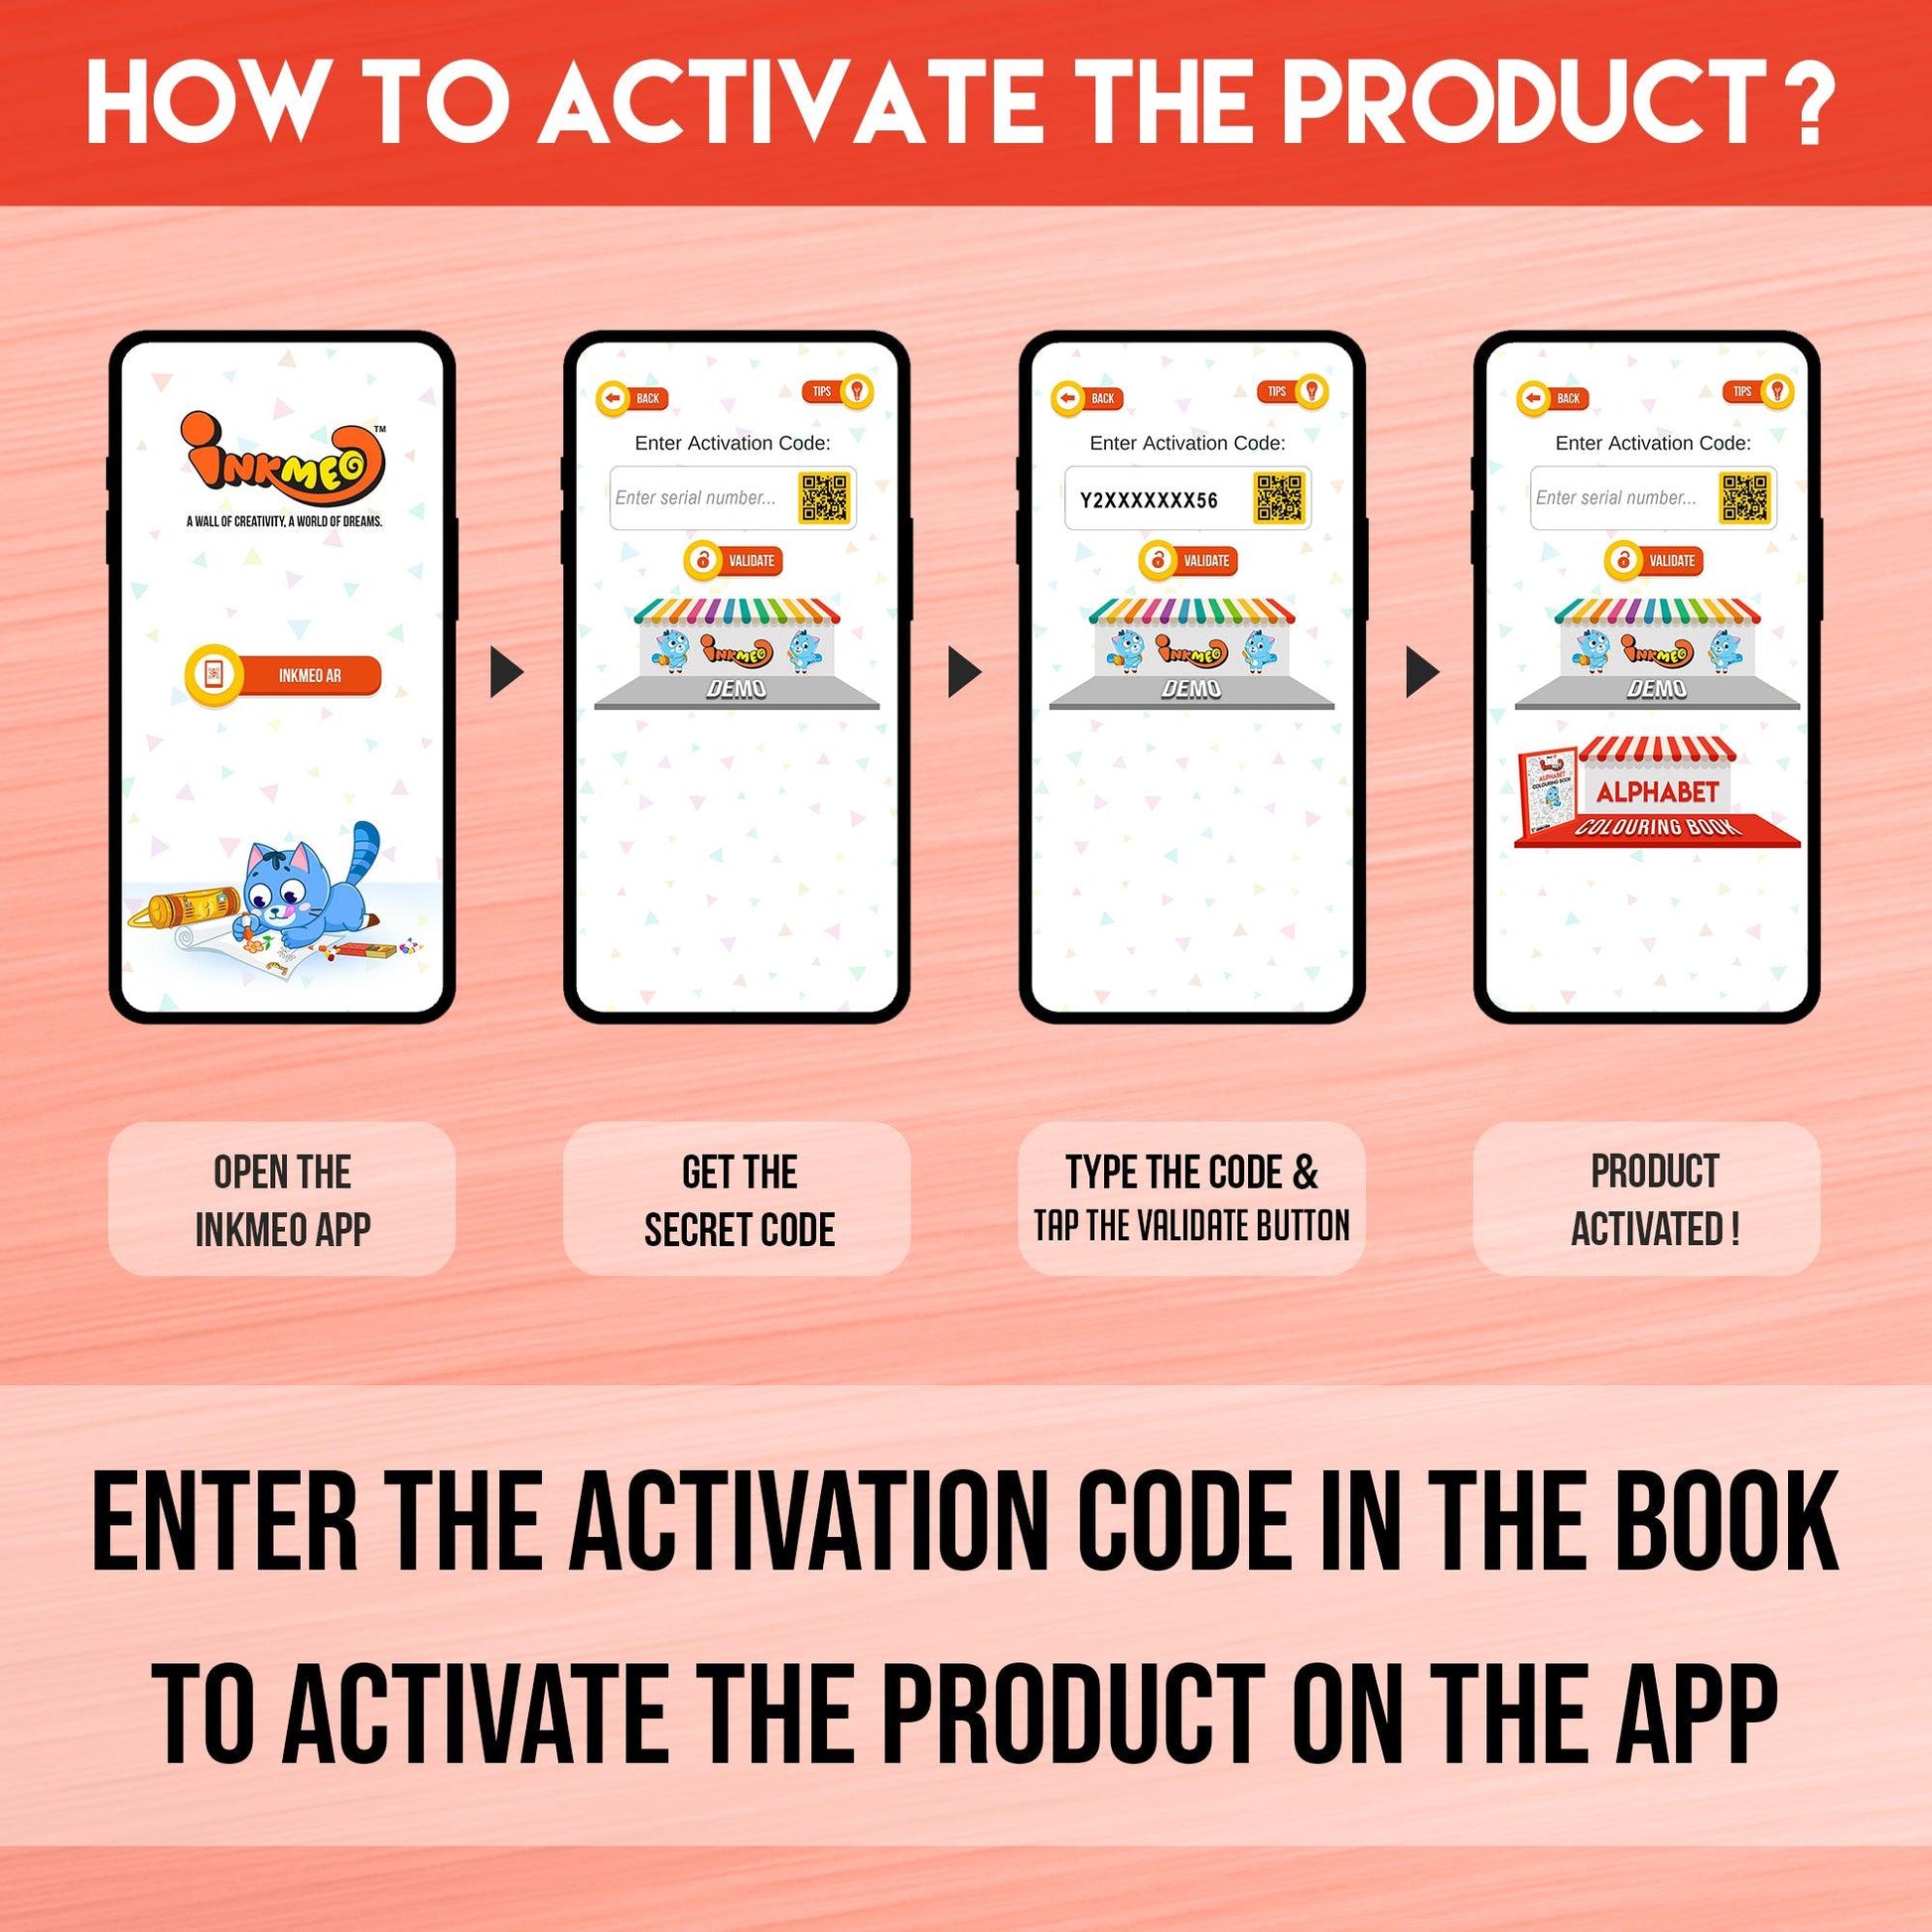 The image displays a red background with four phones showcasing the message "To access the Inkmeo app, acquire the secret code, input the code, and tap for validation to activate the product.